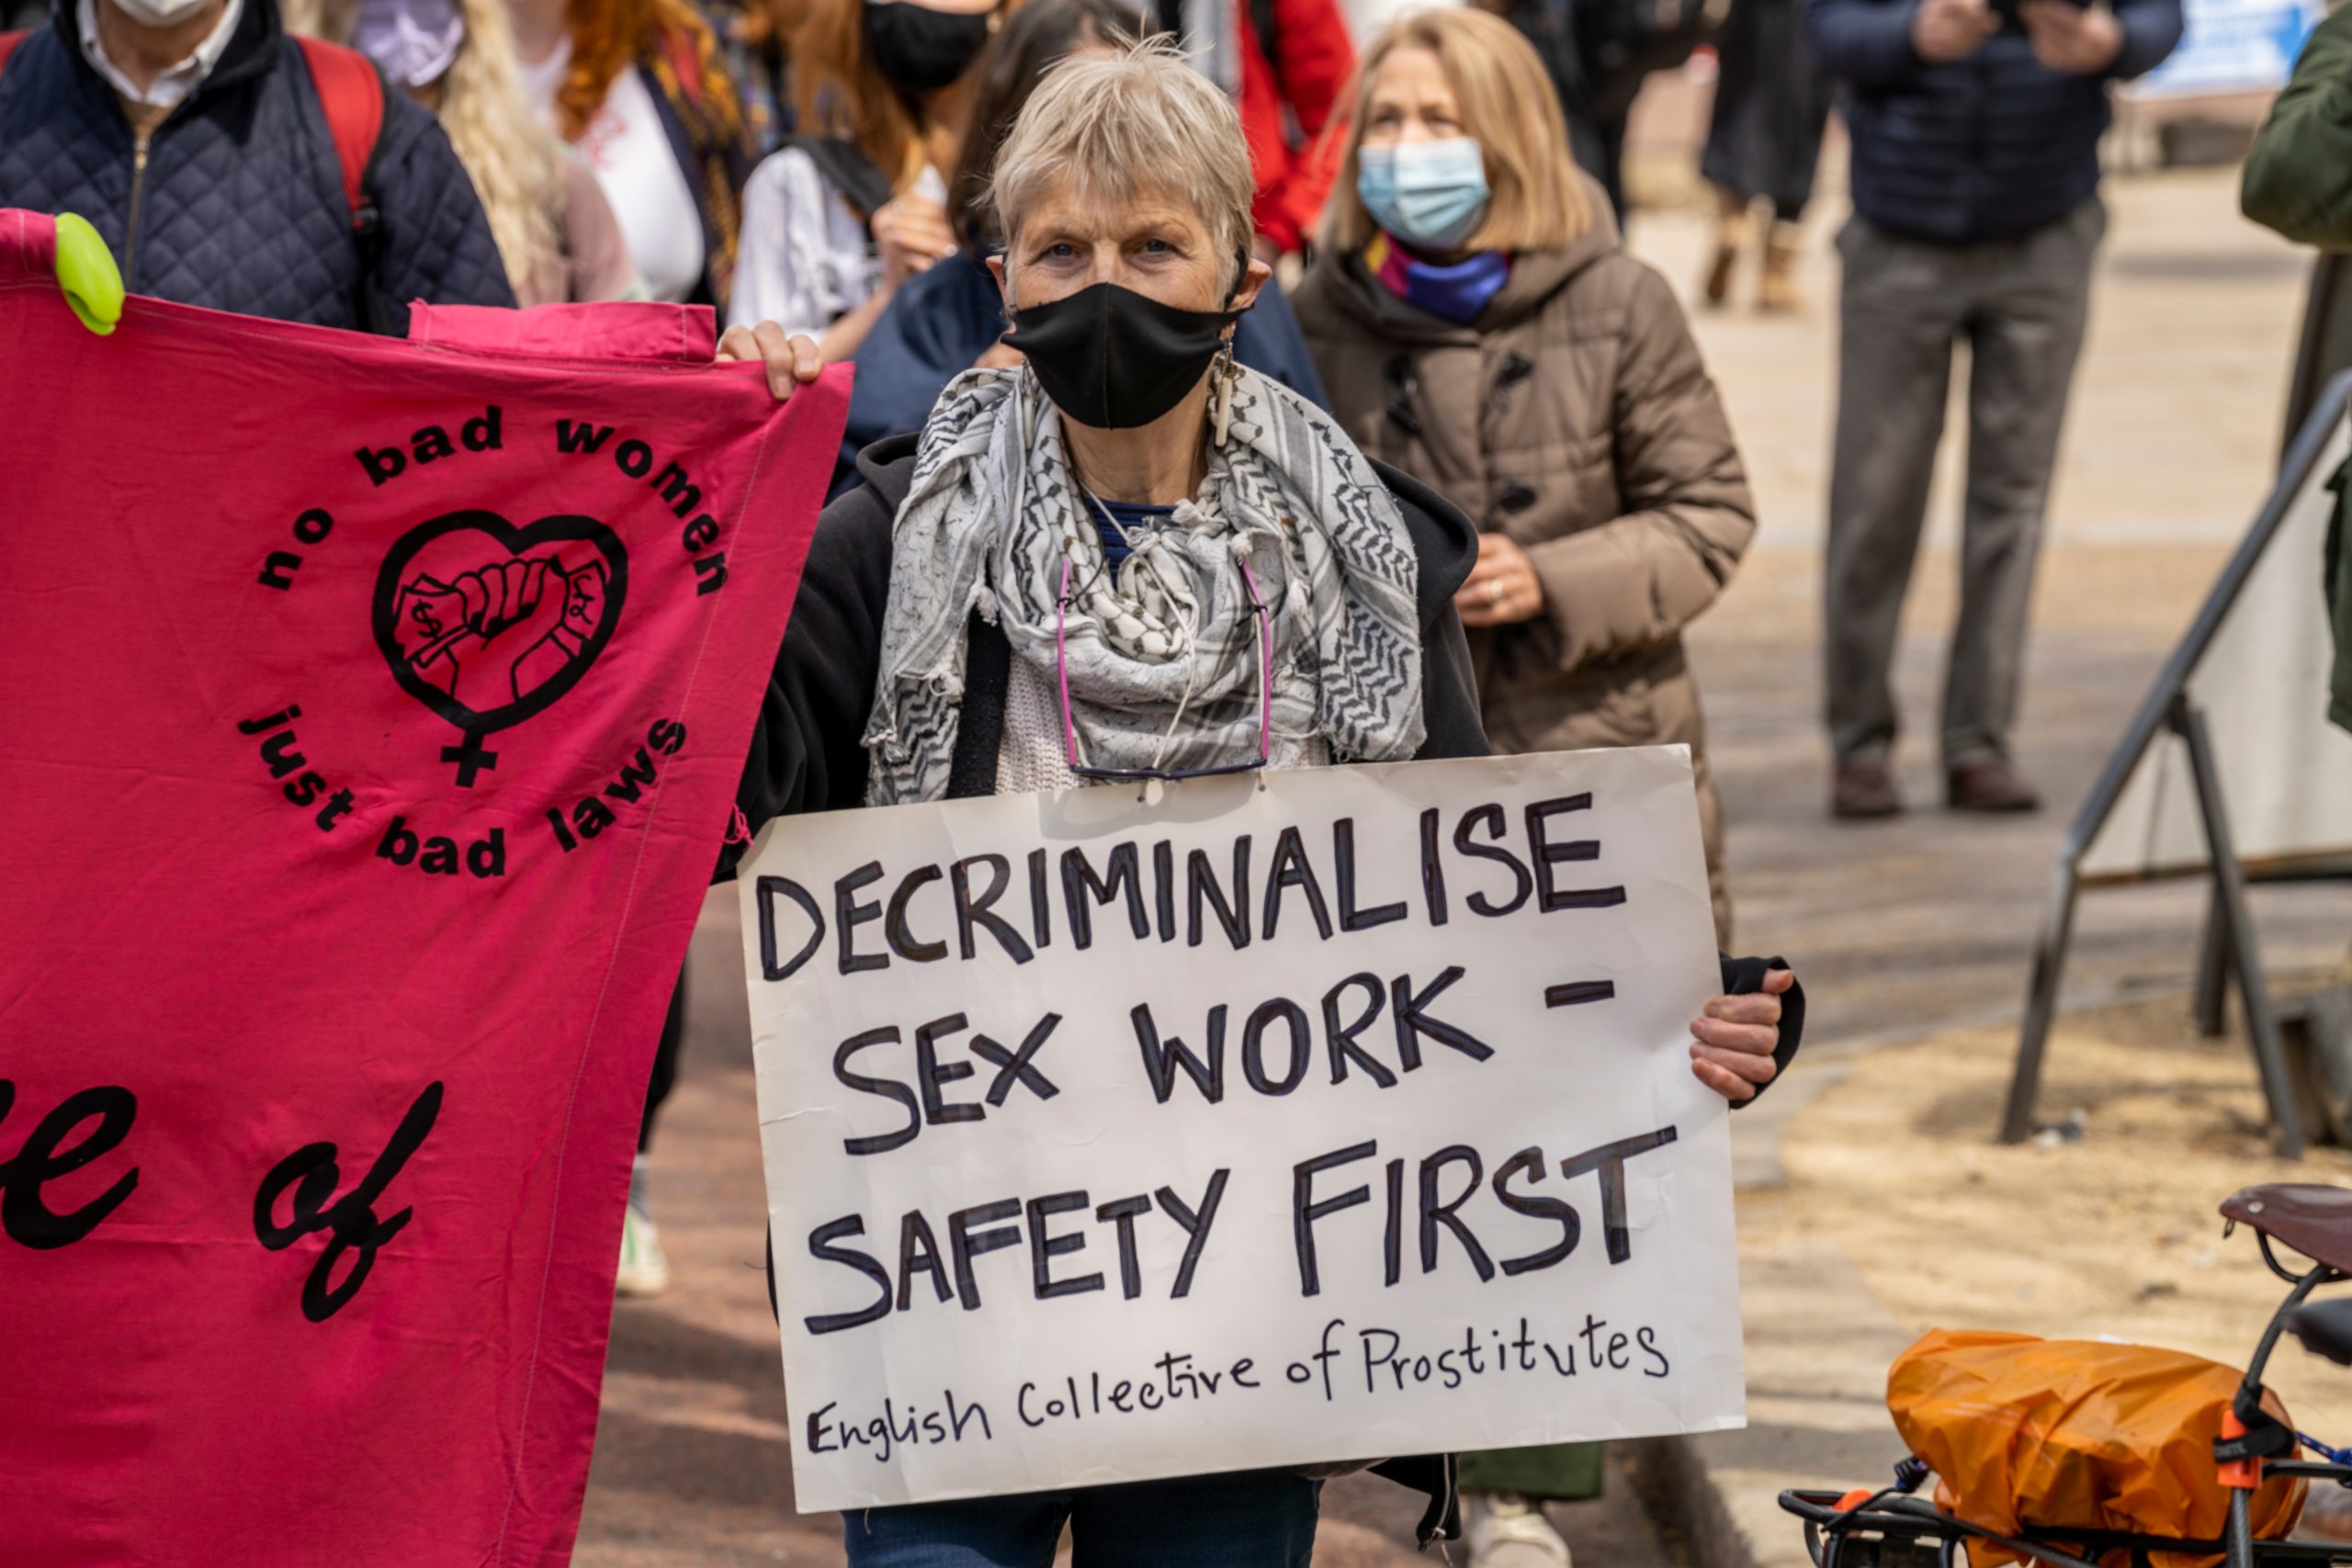 Protestor holding up a sign that says "decriminalize sex work- safety first"